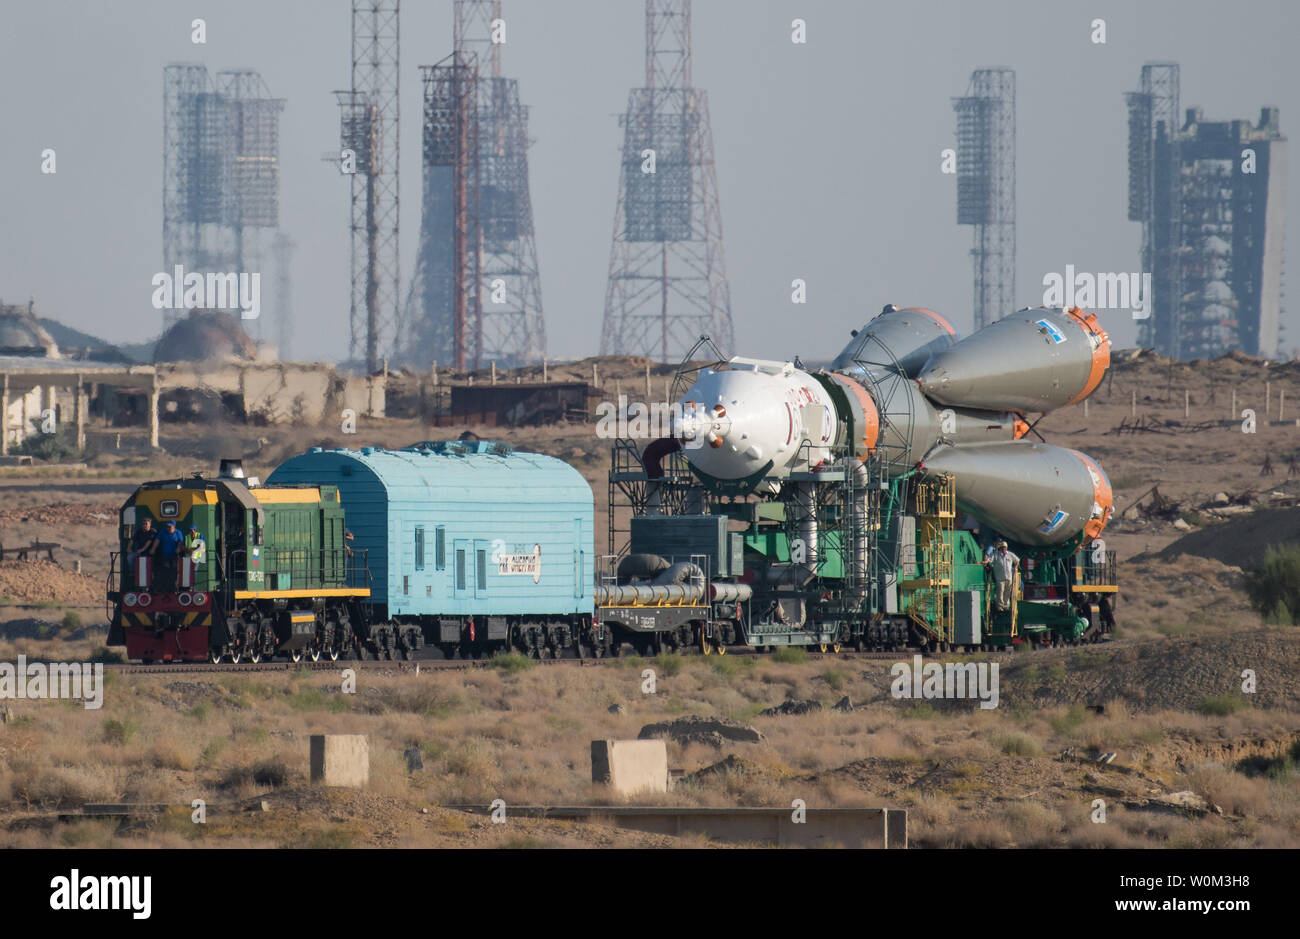 The Soyuz MS-05 spacecraft is rolled out by train to the launch pad at the Baikonur Cosmodrome, Kazakhstan, on July 26, 2017. Expedition 52 flight engineer Sergei Ryazanskiy of Roscosmos, flight engineer Randy Bresnik of NASA, and flight engineer Paolo Nespoli of ESA (European Space Agency), are scheduled to launch to the International Space Station aboard the Soyuz spacecraft from the Baikonur Cosmodrome on July 28. NASA Photo by Joel Kowsky/UPI Stock Photo